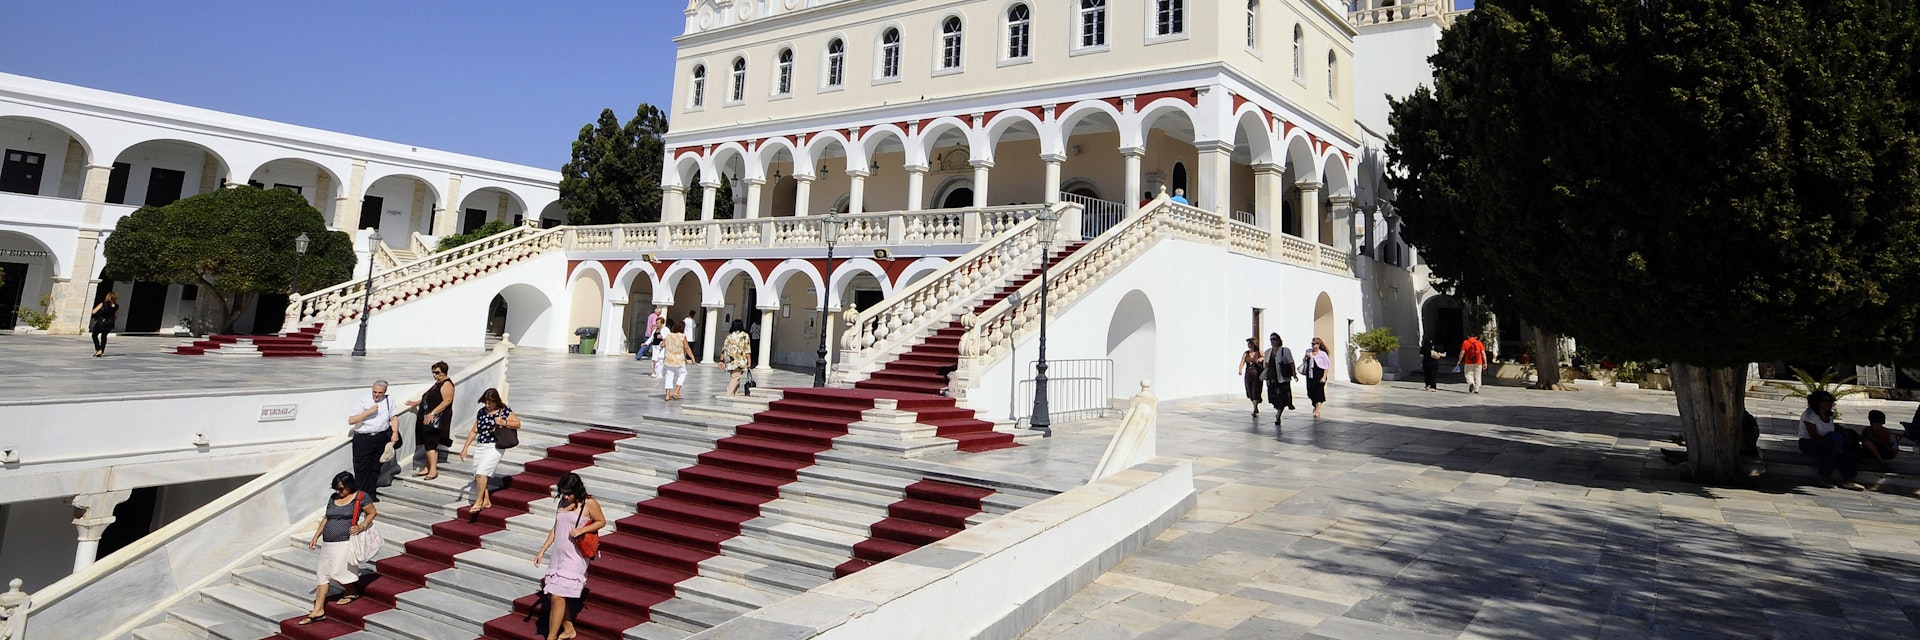 People on the stairs in front of pilgrimage basilica Panagia Evangelistria, Tinos-town, island of Tinos, the Cyclades, Greece, Europe